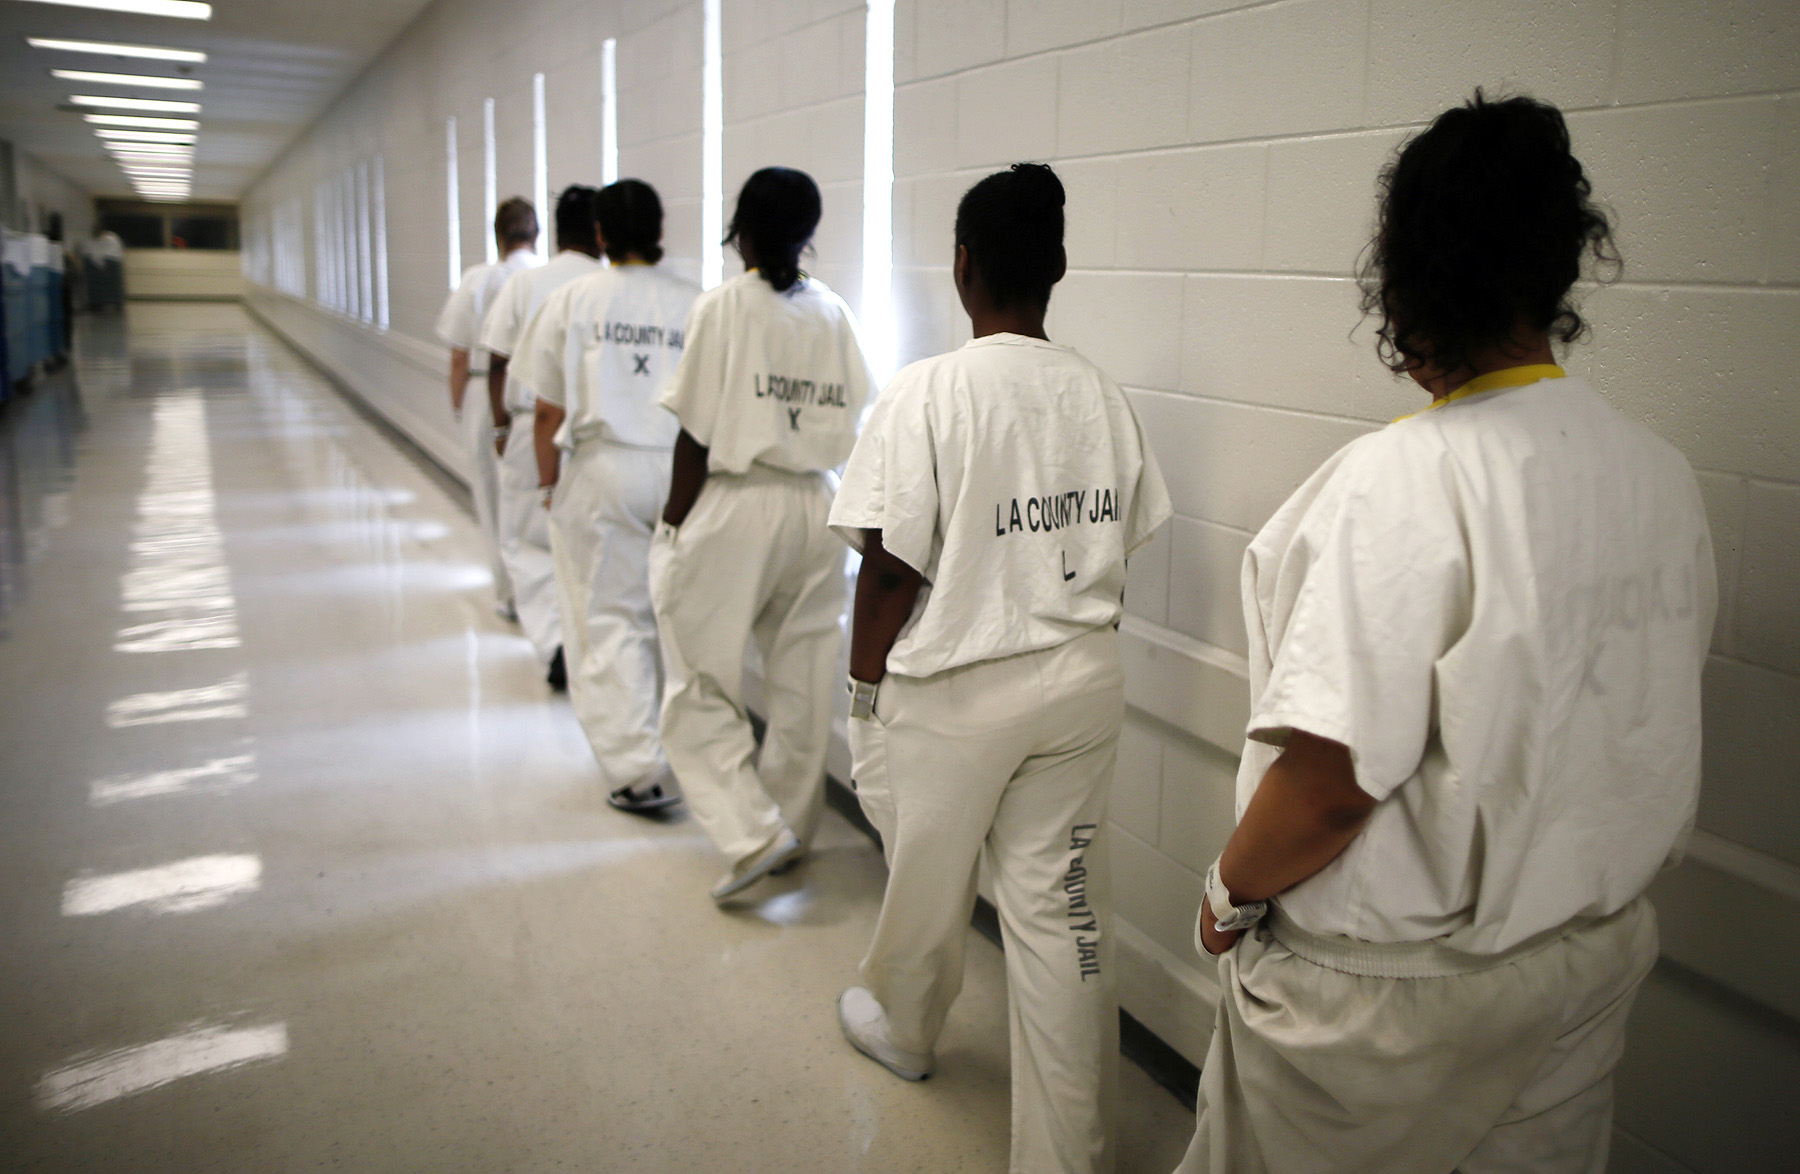 Women walk along a corridor at the Los Angeles County women's jail in Lynwood, California April 26, 2013. The Second Chance Women's Re-entry Court is one of the first in the U.S. to focus on women, and offers a cost-saving alternative to prison for women who plead guilty to non-violent crimes and volunteer for treatment. Of the 297 women who have been through the court since 2007, 100 have graduated, and only 35 have been returned to state prison. REUTERS/Lucy Nicholson (UNITED STATES - Tags: CRIME LAW) - RTXZ1G4